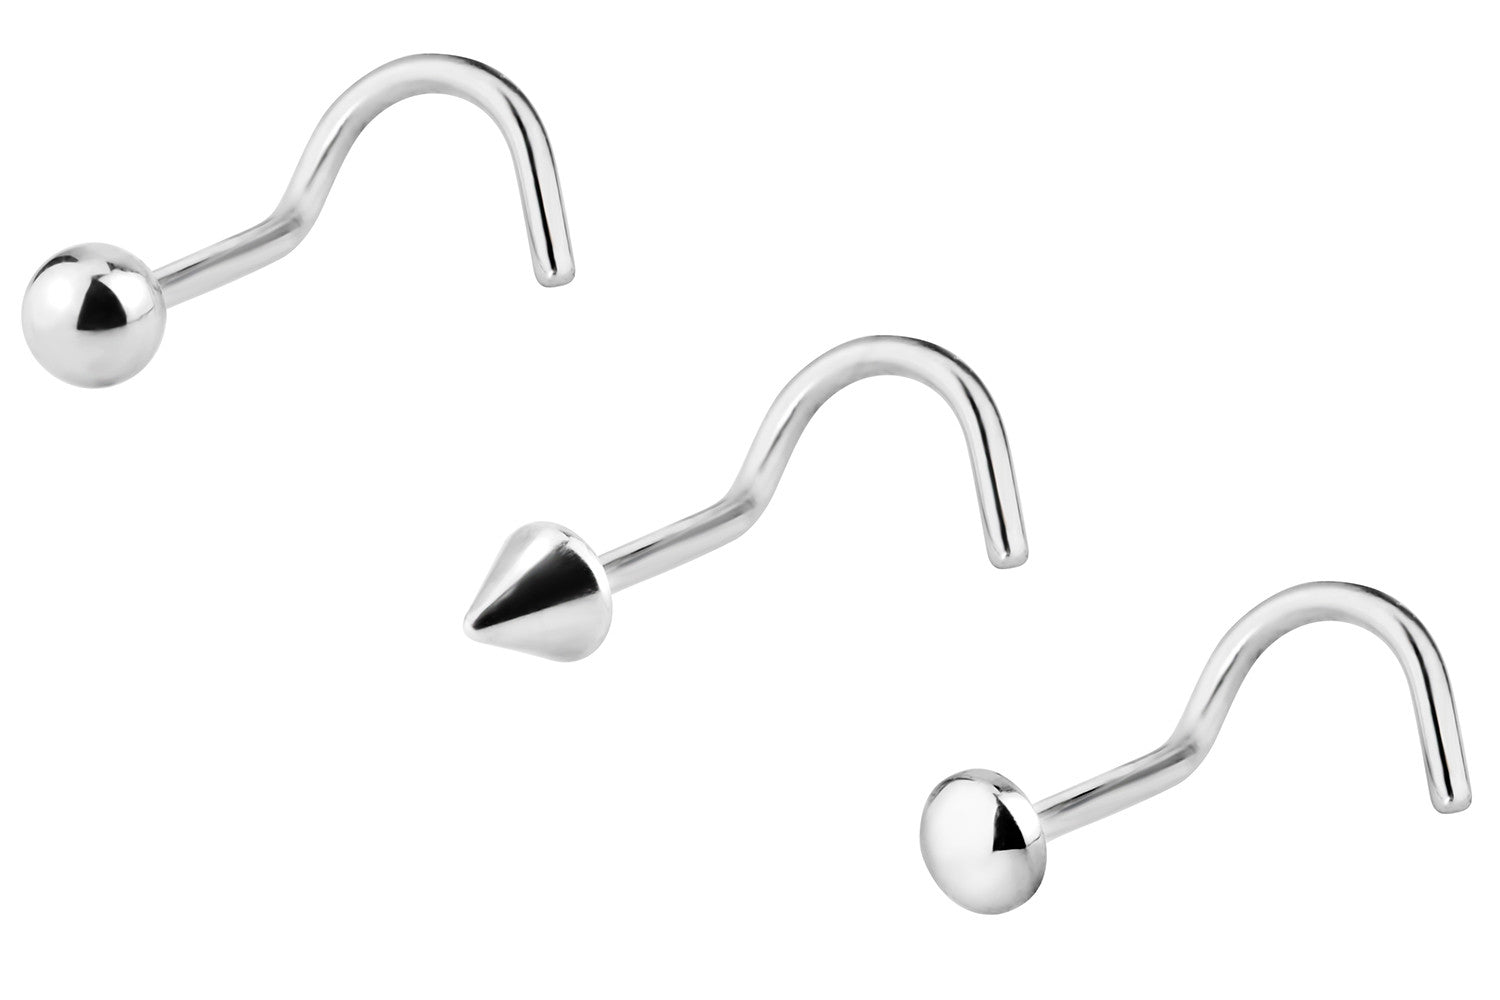 These 20 gauge nose screws are made with 316L Surgical Steel. This body jewelry is hypoallergenic and 100% lead and nickel free.